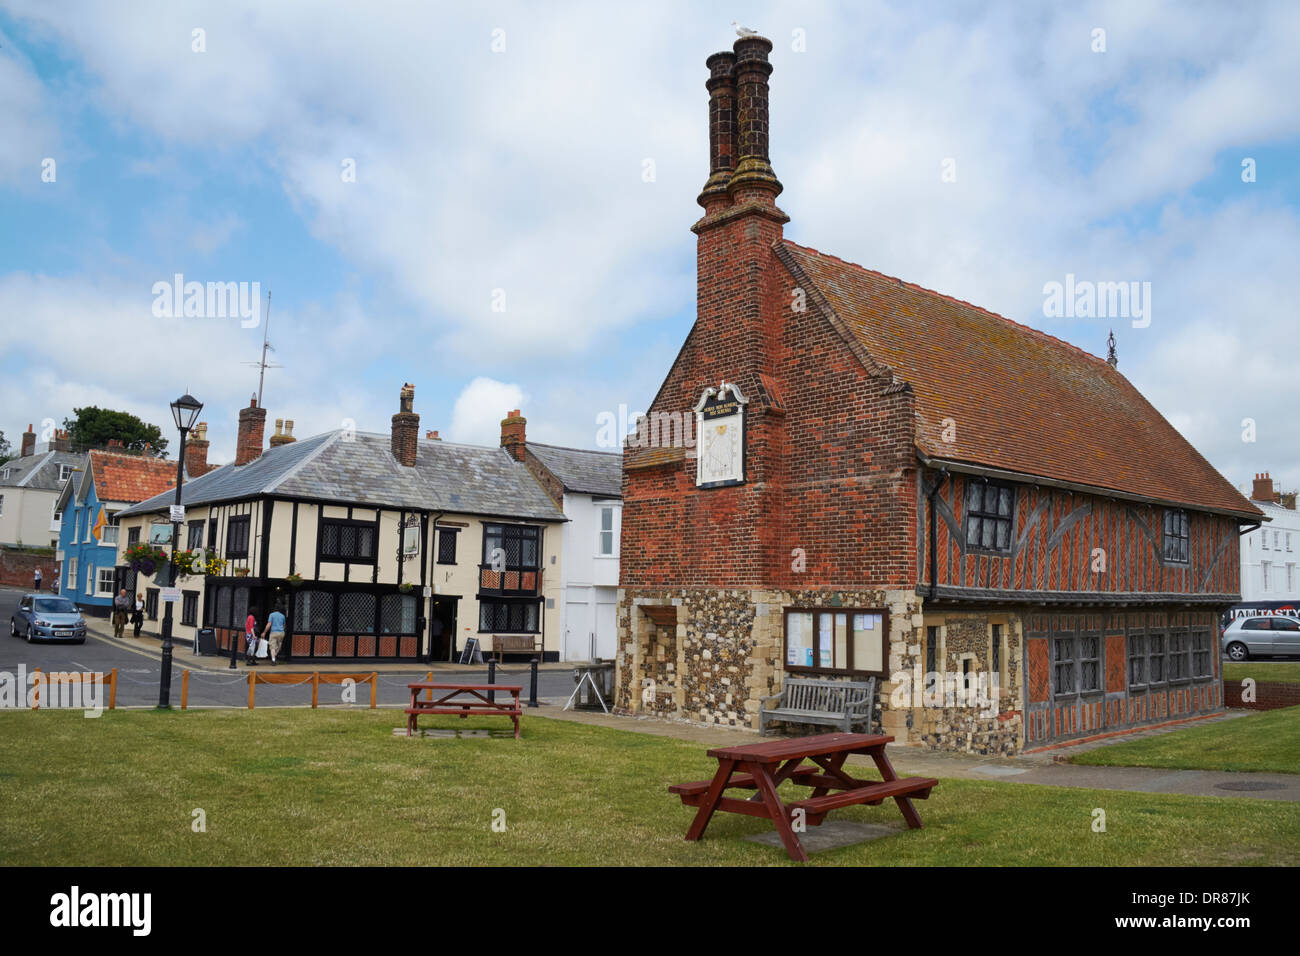 The Moot Hall, Aldeburgh, Suffolk, England. Stock Photo